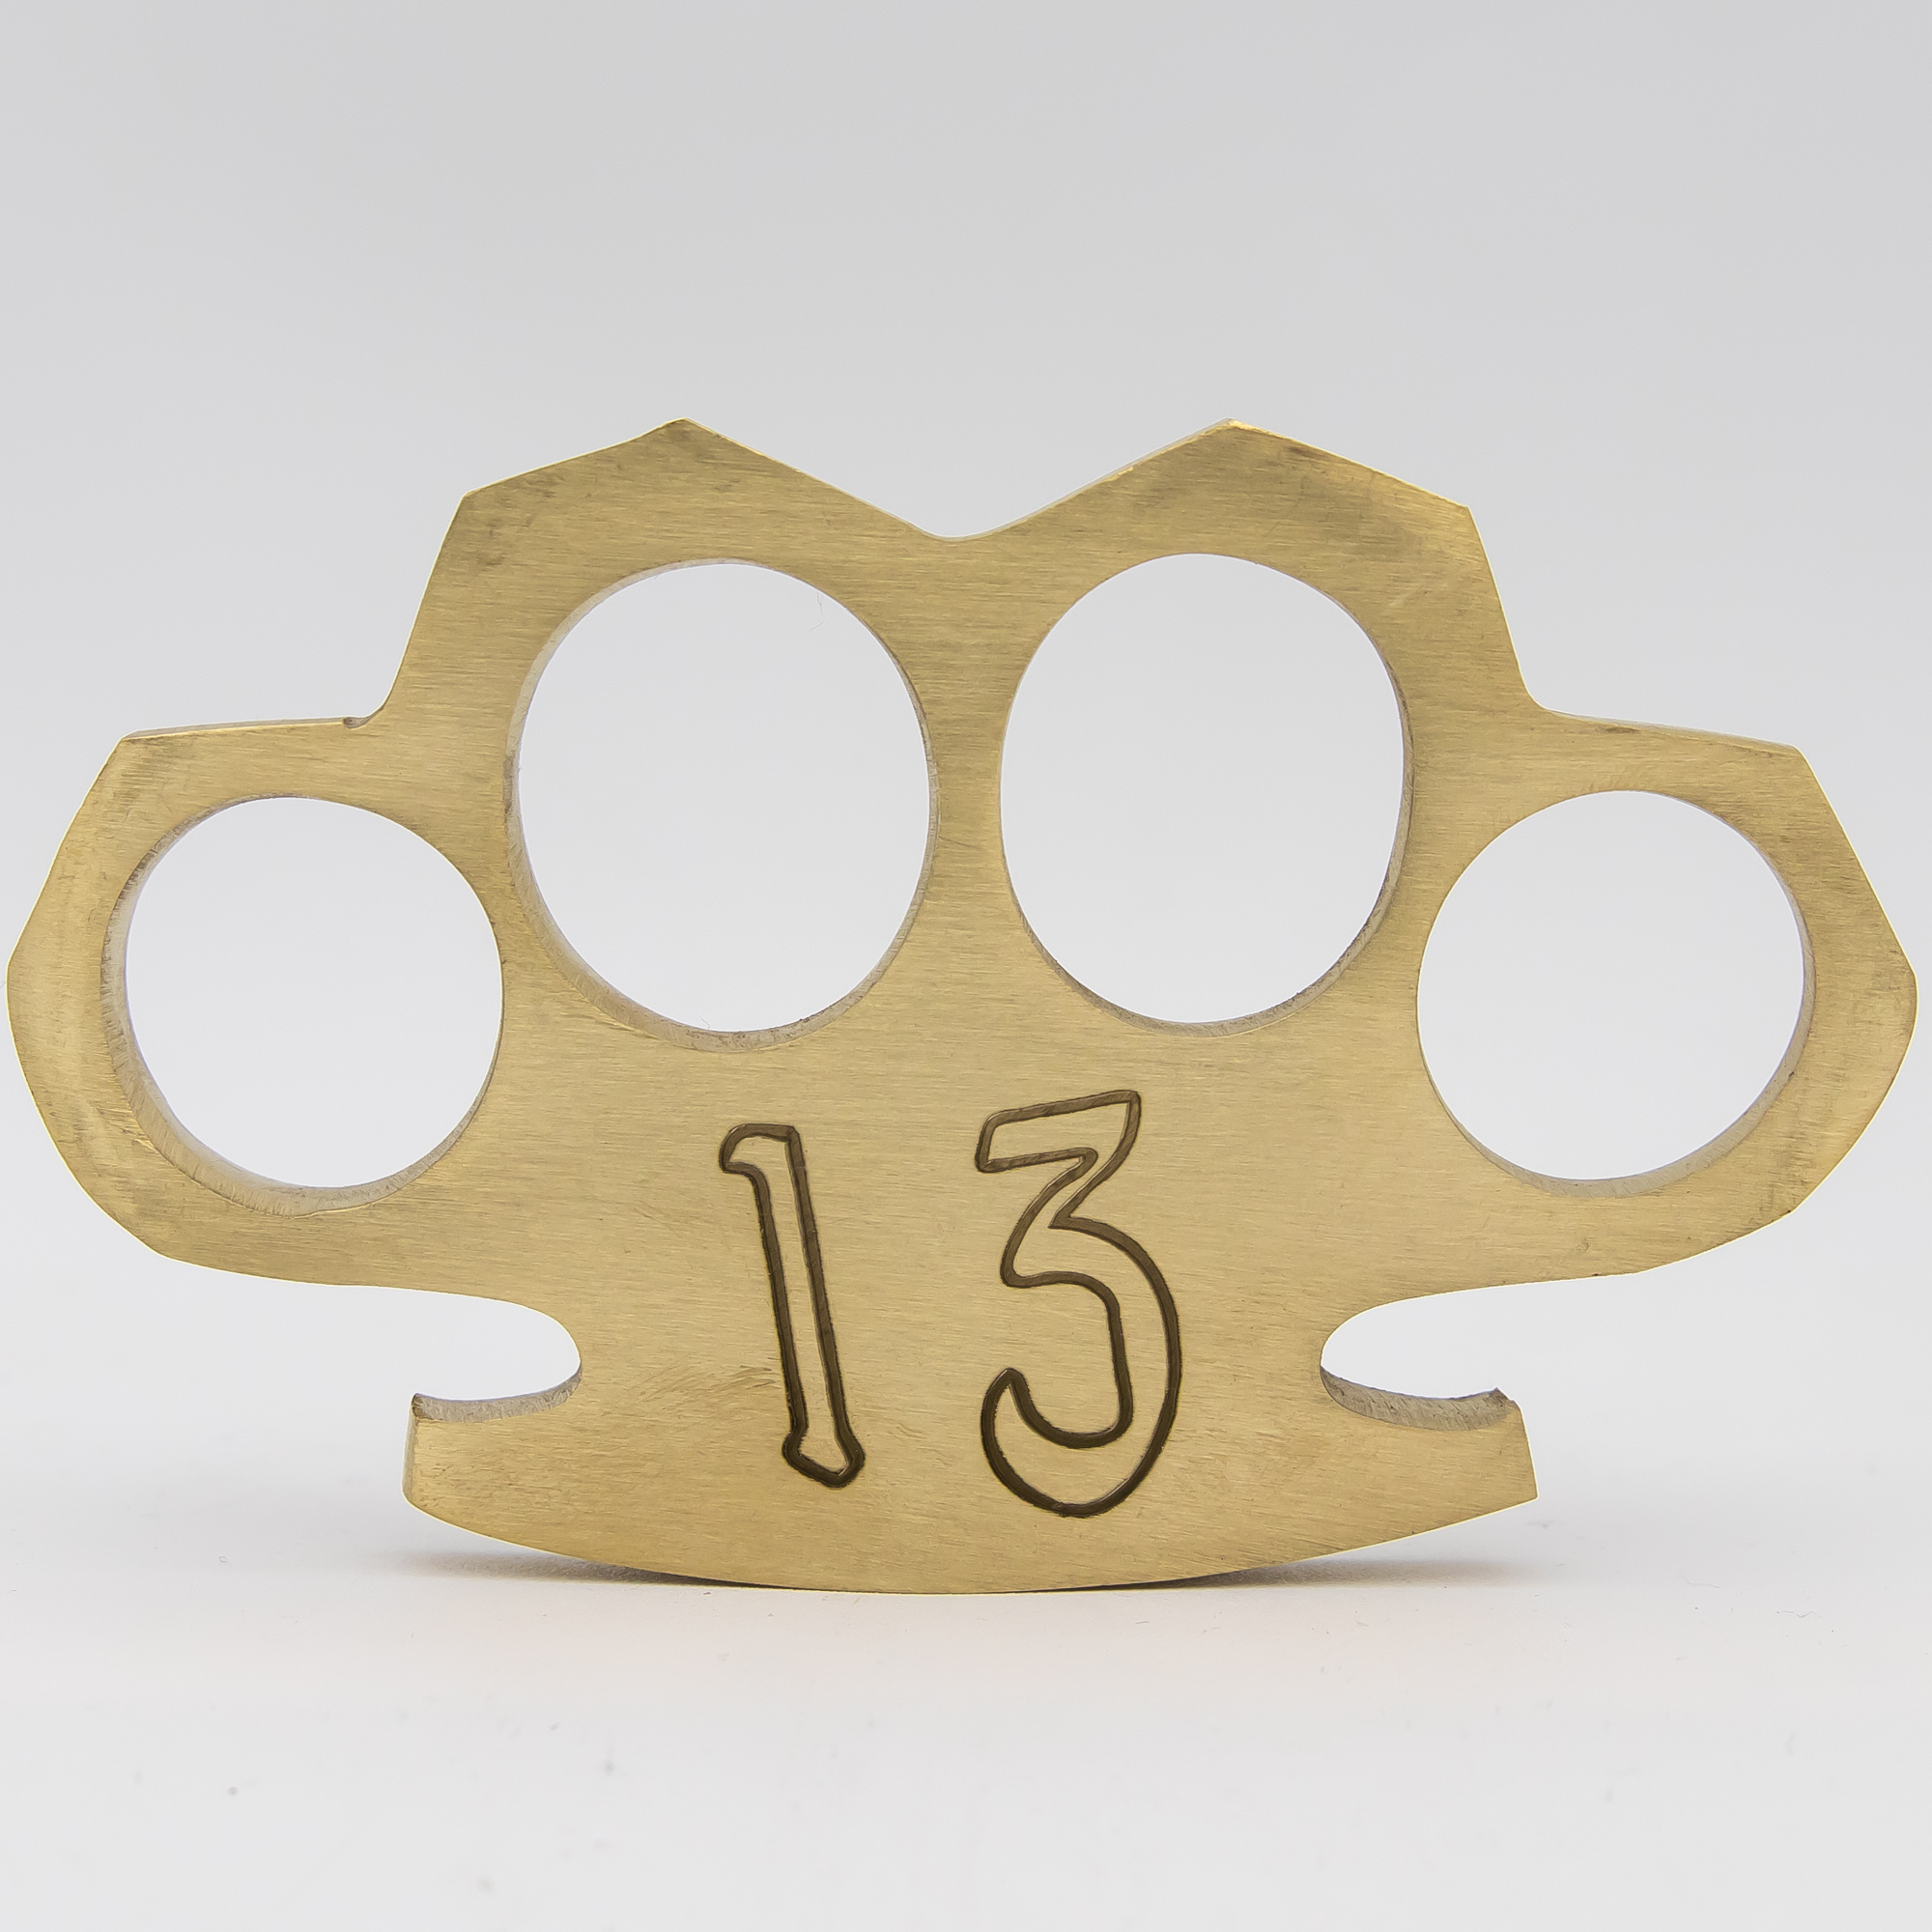 Luck in Heart 100% Pure Brass Knuckle Paper Weight ACCESSORY